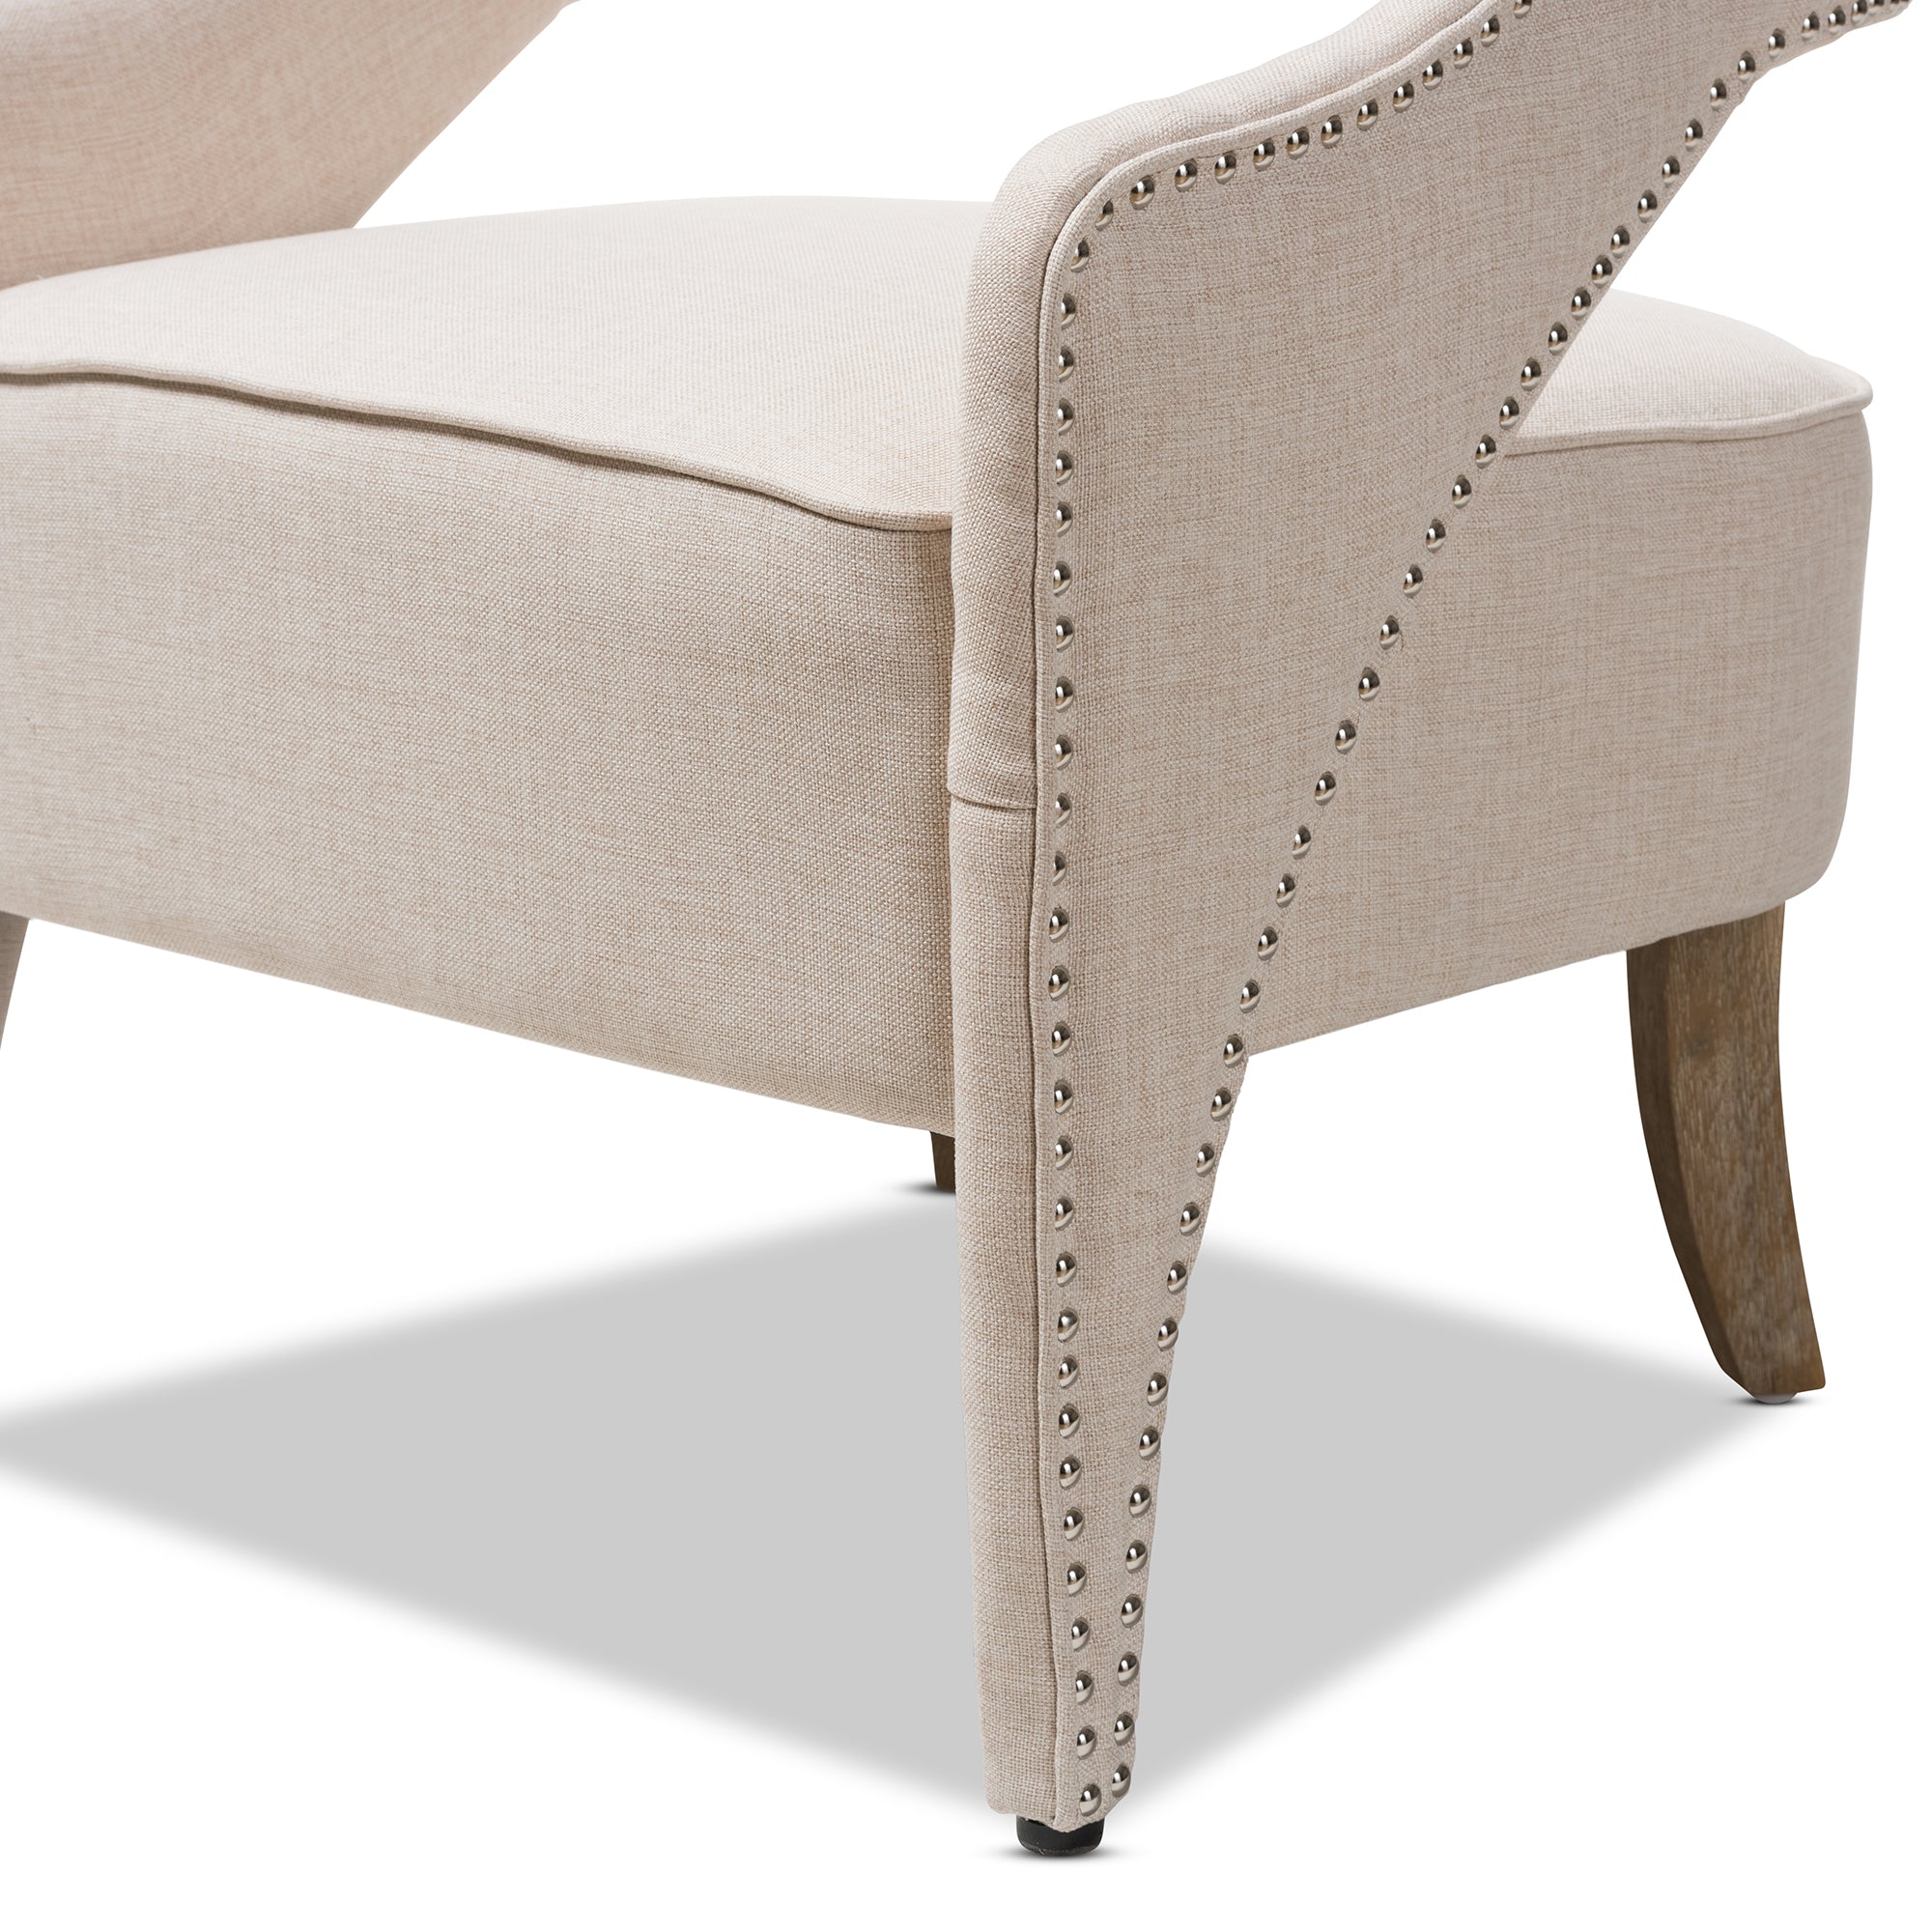 Floriane Contemporary Living Room Chair-Chair-Baxton Studio - WI-Wall2Wall Furnishings